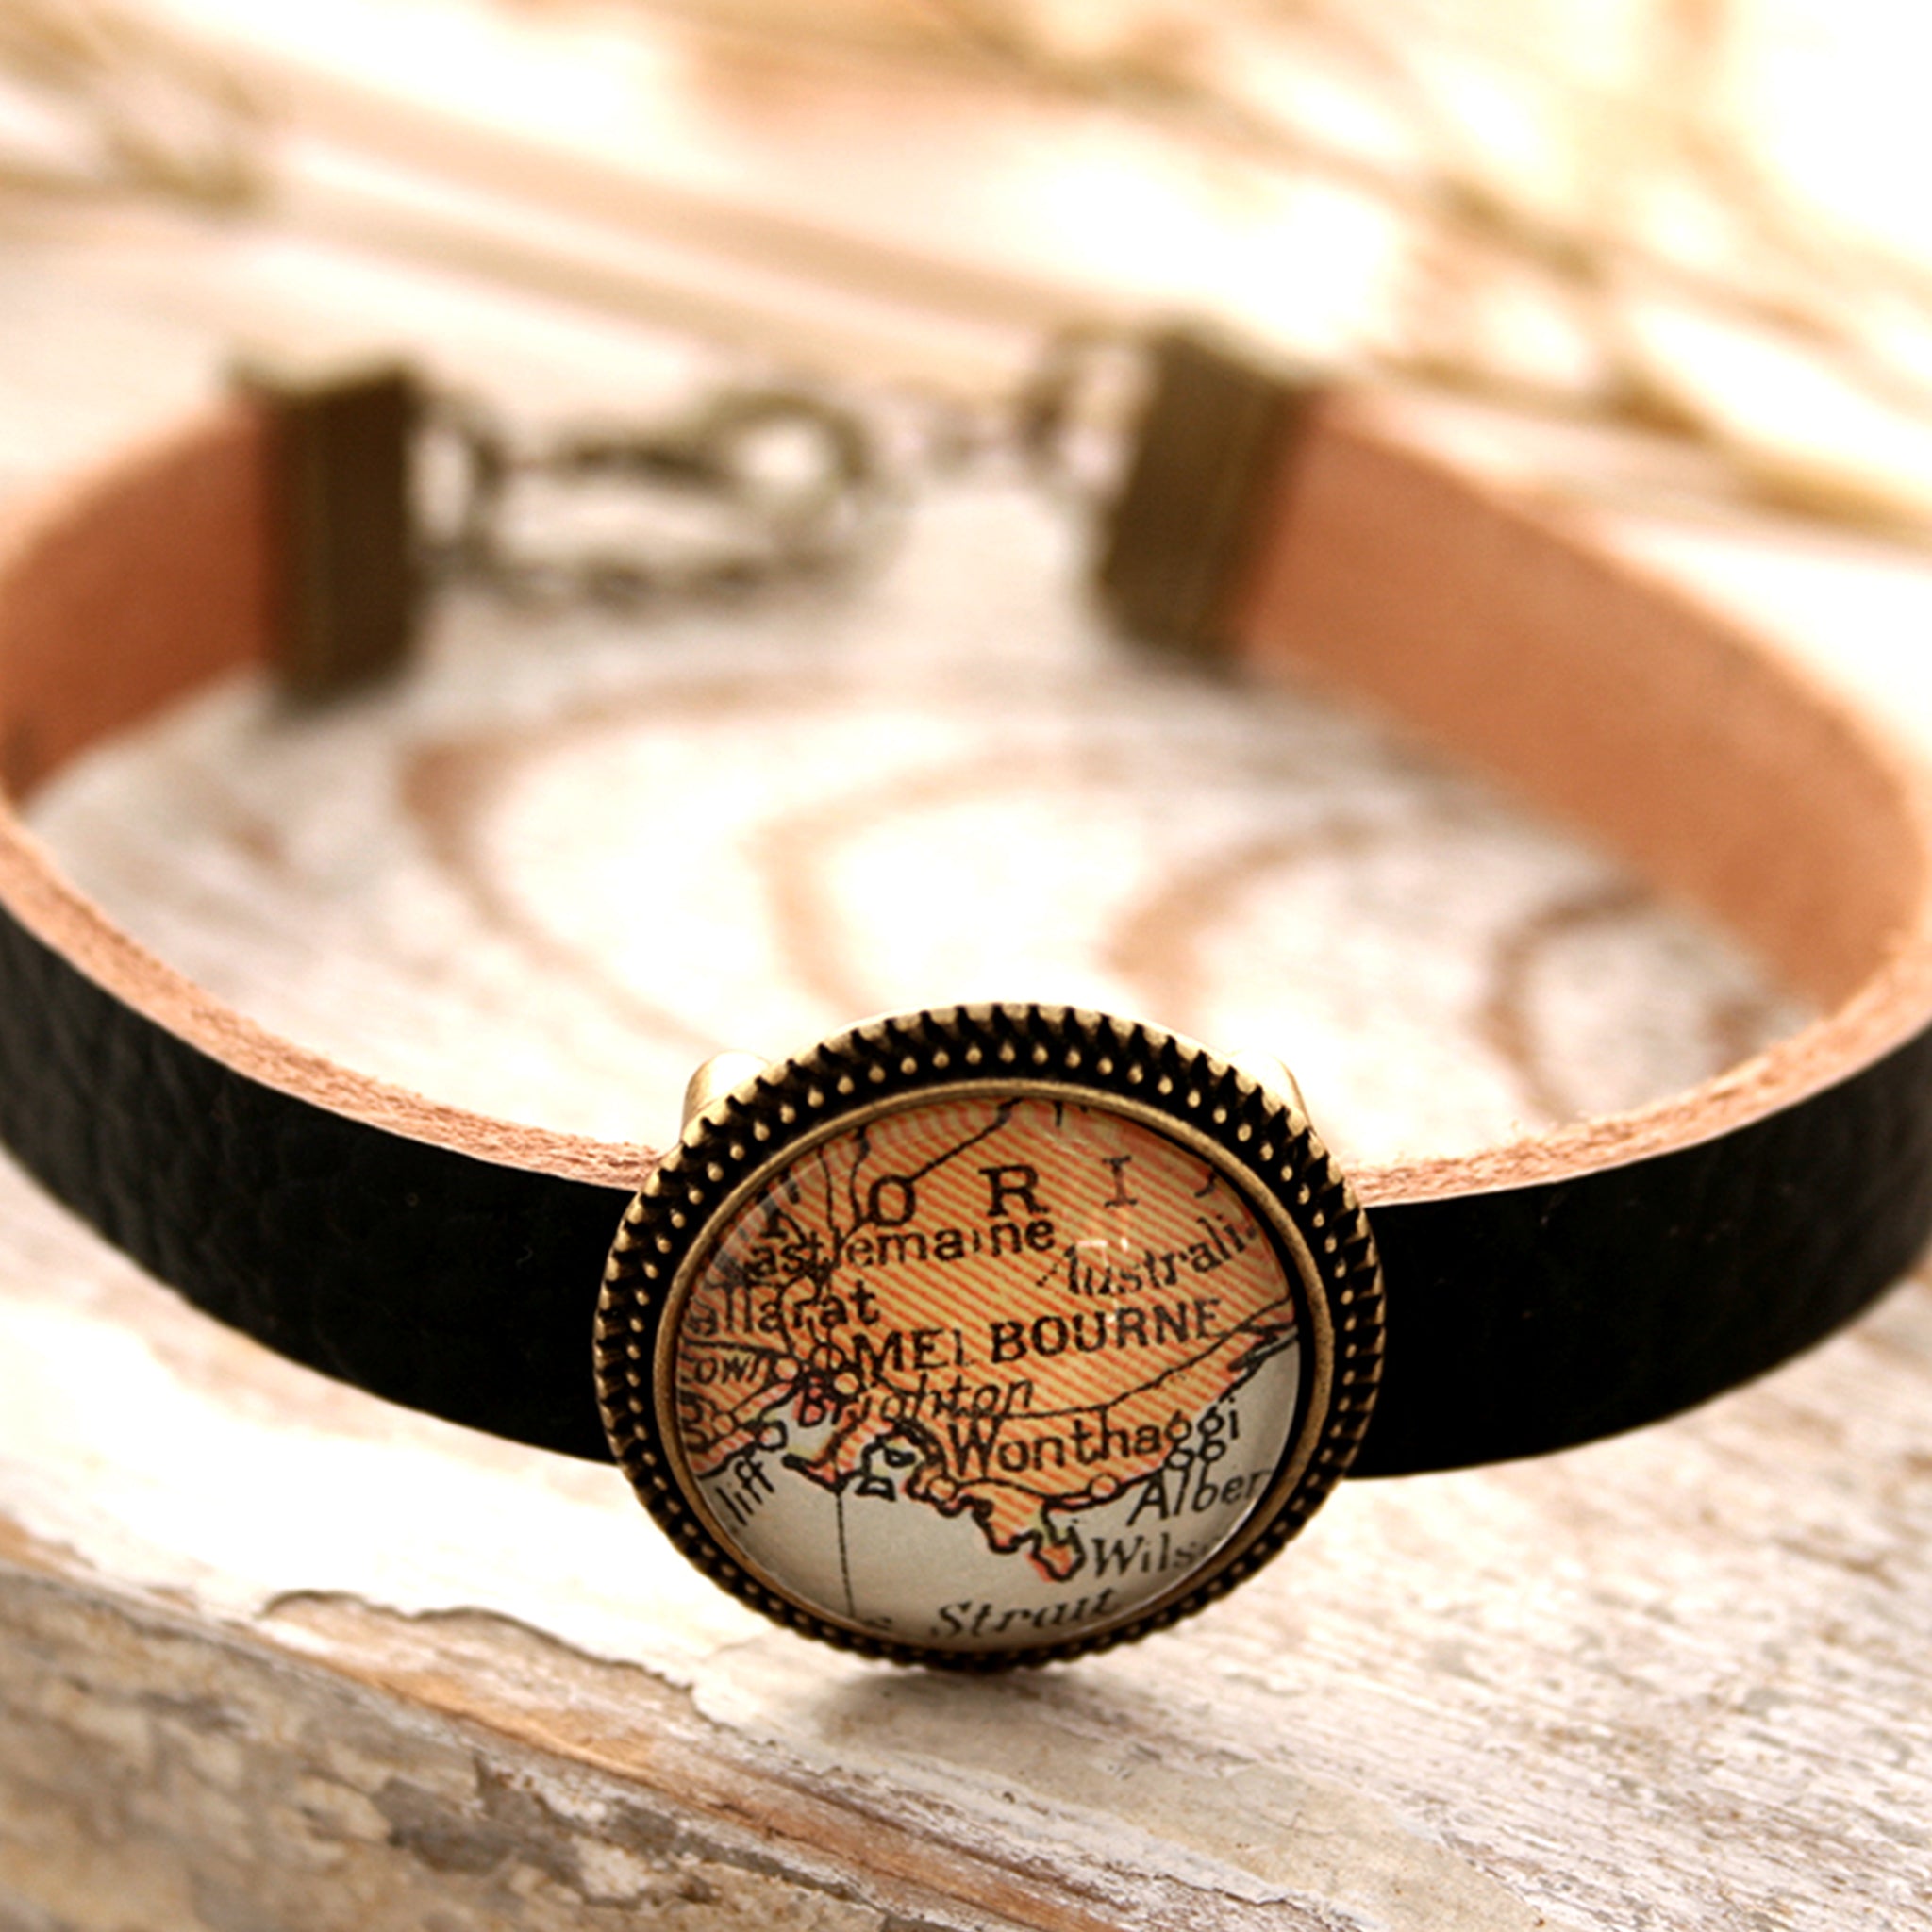 Personalised black leather bracelet featuring map of Melbourne